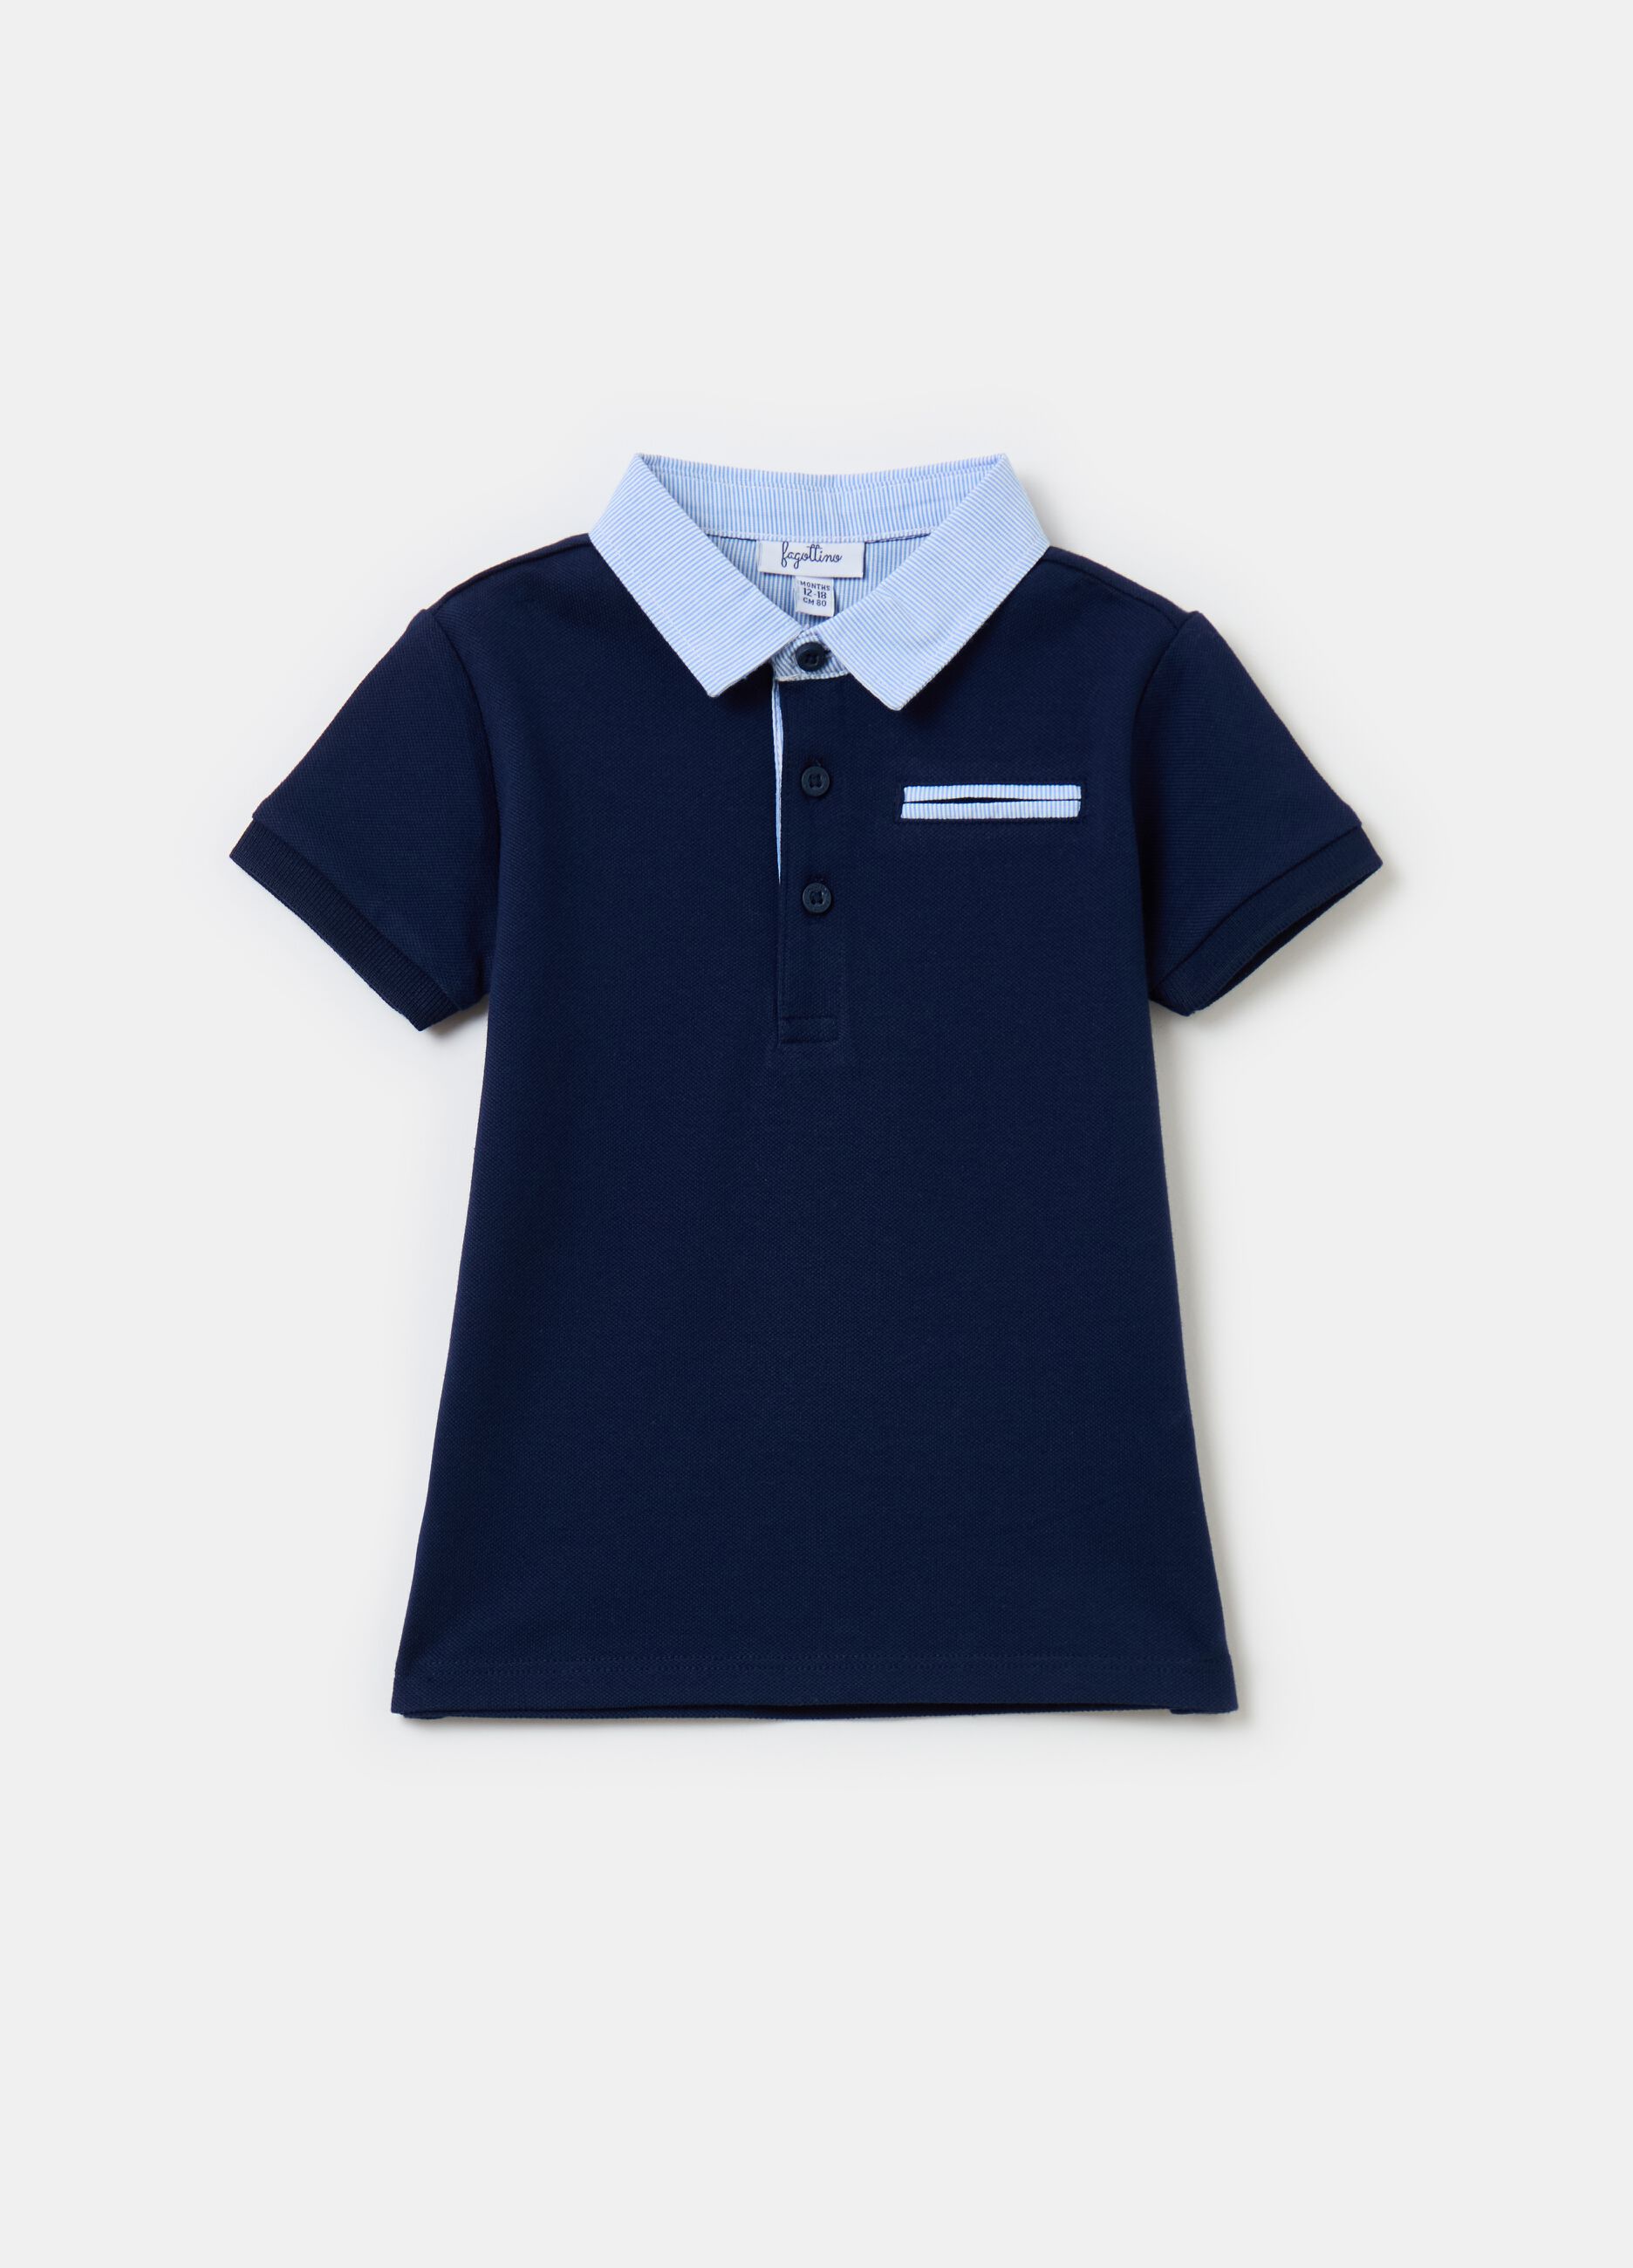 Piquet polo shirt with striped details